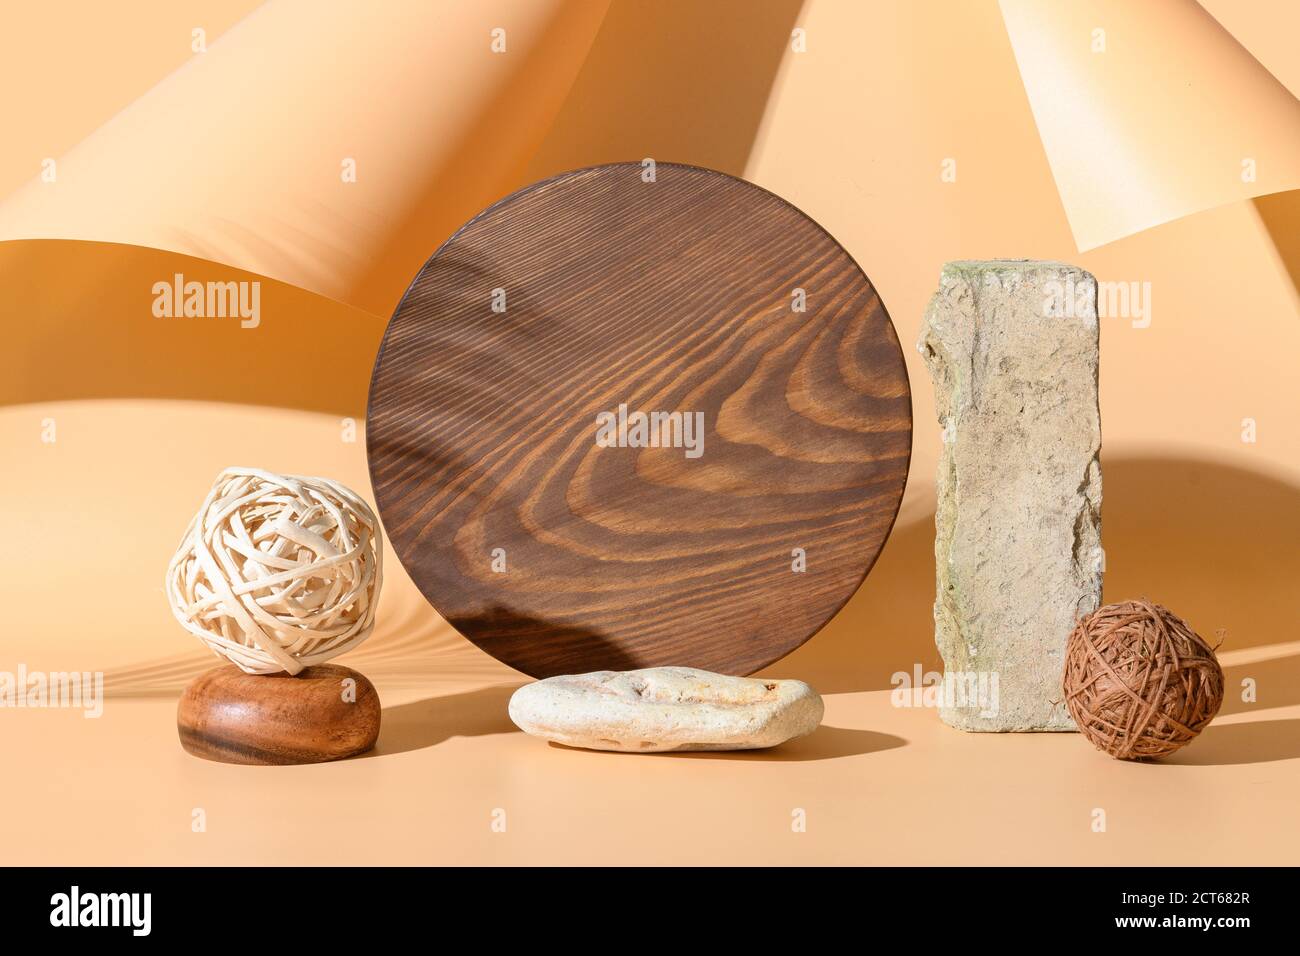 Podiums for products of natural materials stone, bricks, wooden board with sunny shadow on beige background. Monochrome creative template or mock up. Stock Photo